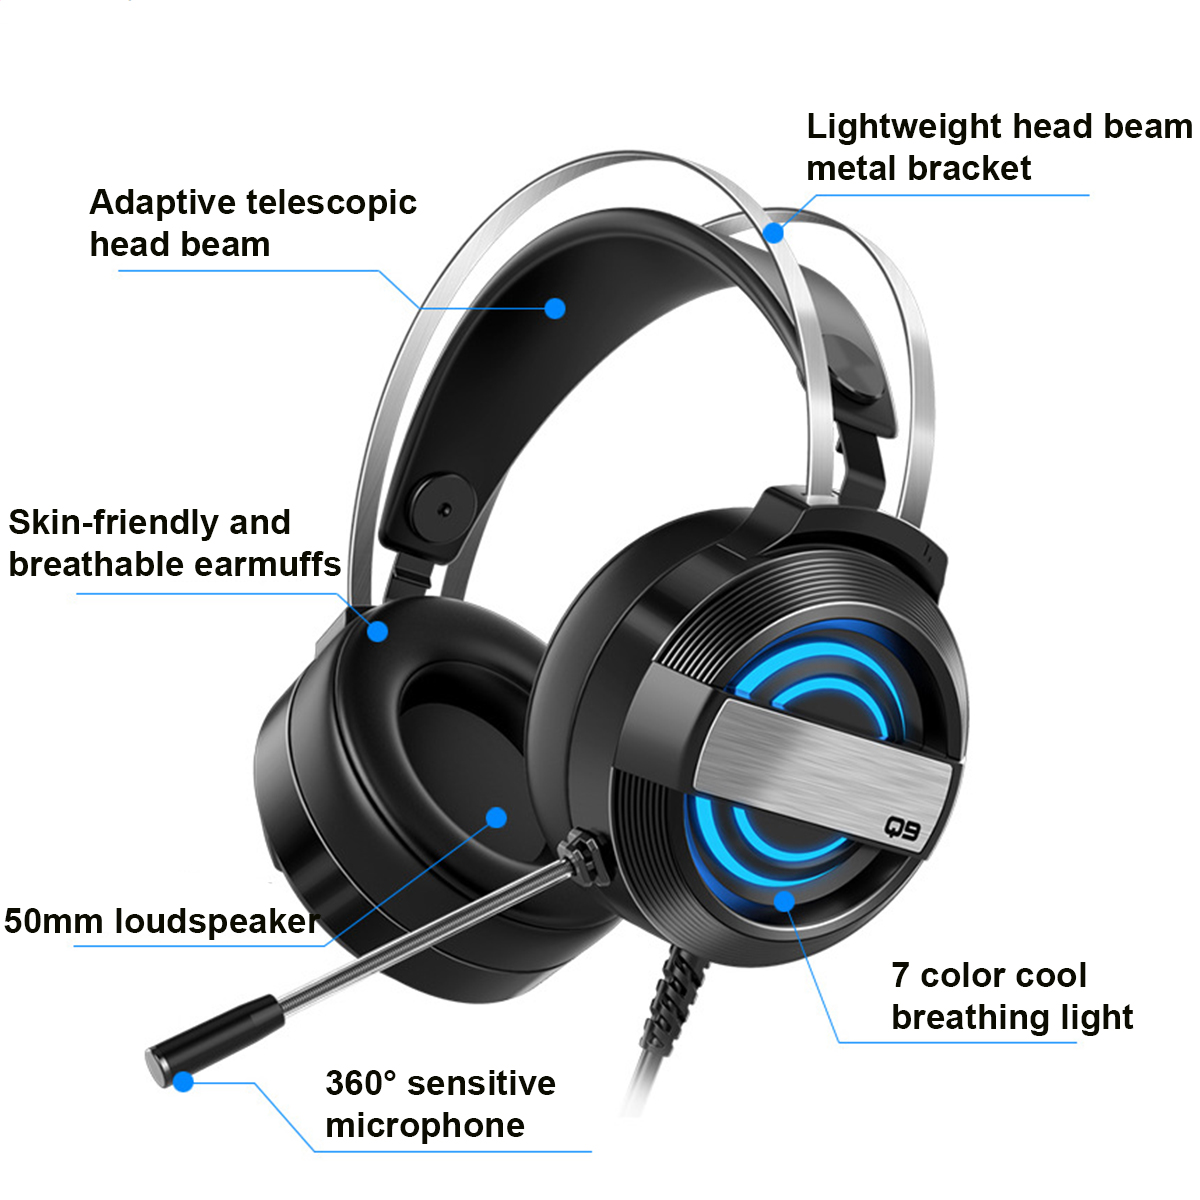 Bakeey-Gaming-Headphone-USB-Port-50mm-Driver-Headset-Foldable-Over-Ear-Gaming-Headset-Noise-Cancelli-1747835-12